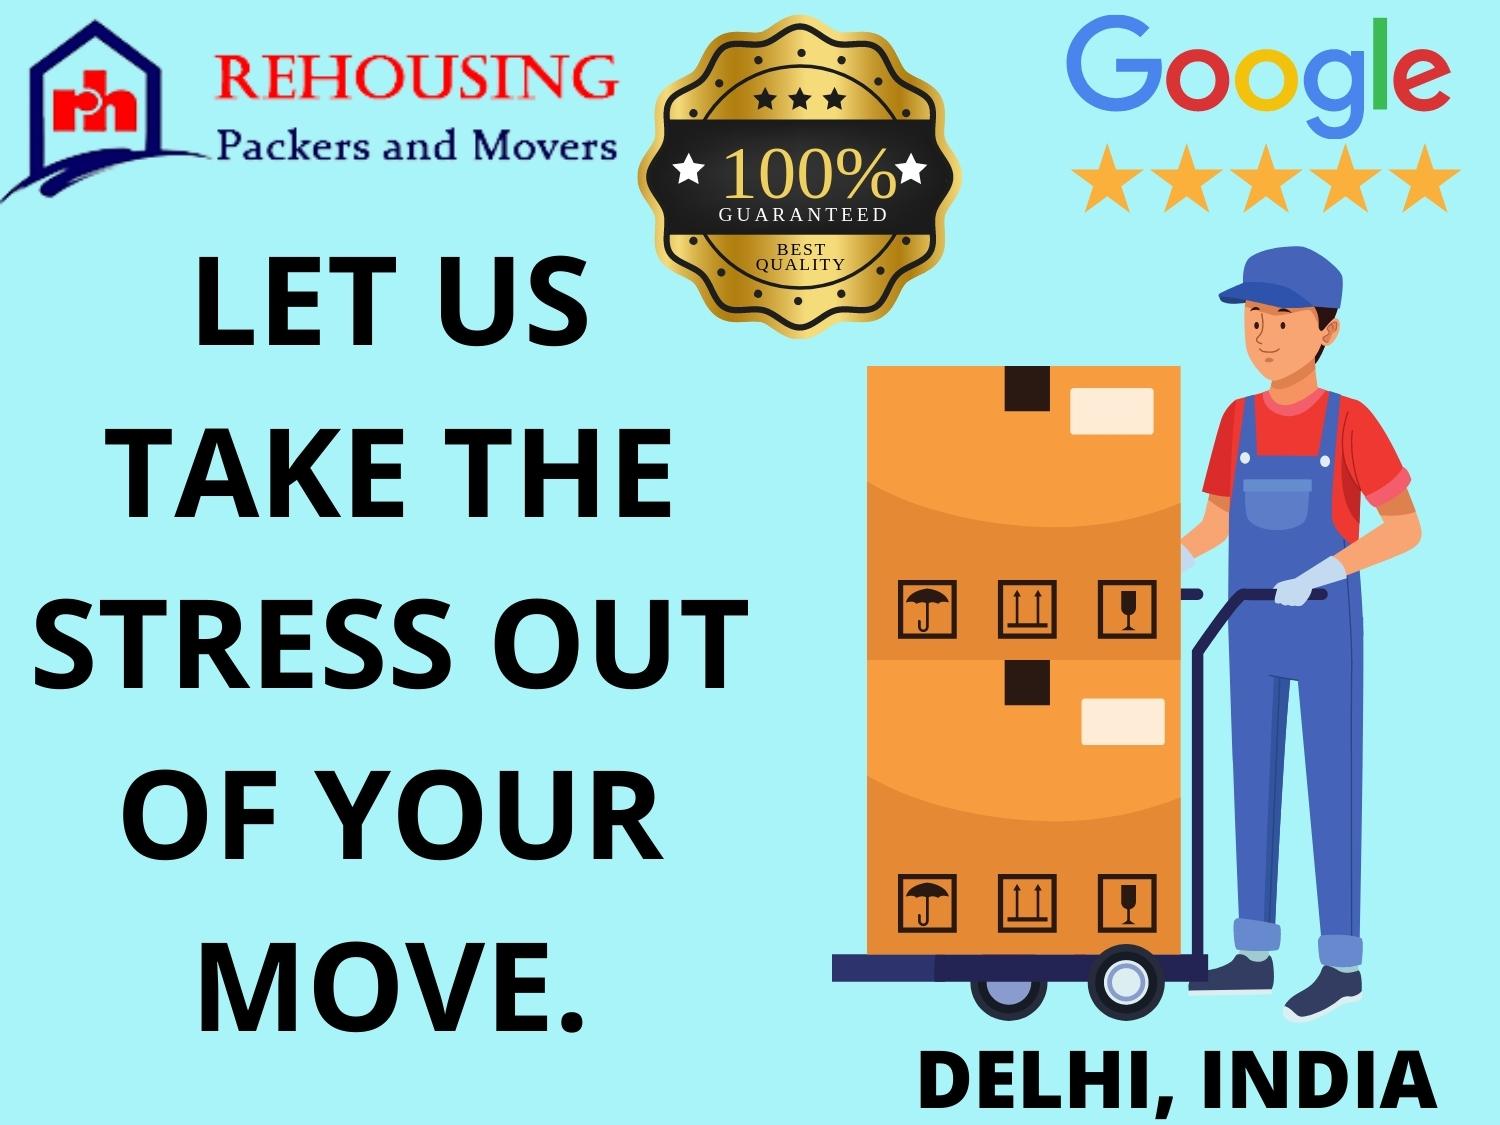 hire packers and movers from us?